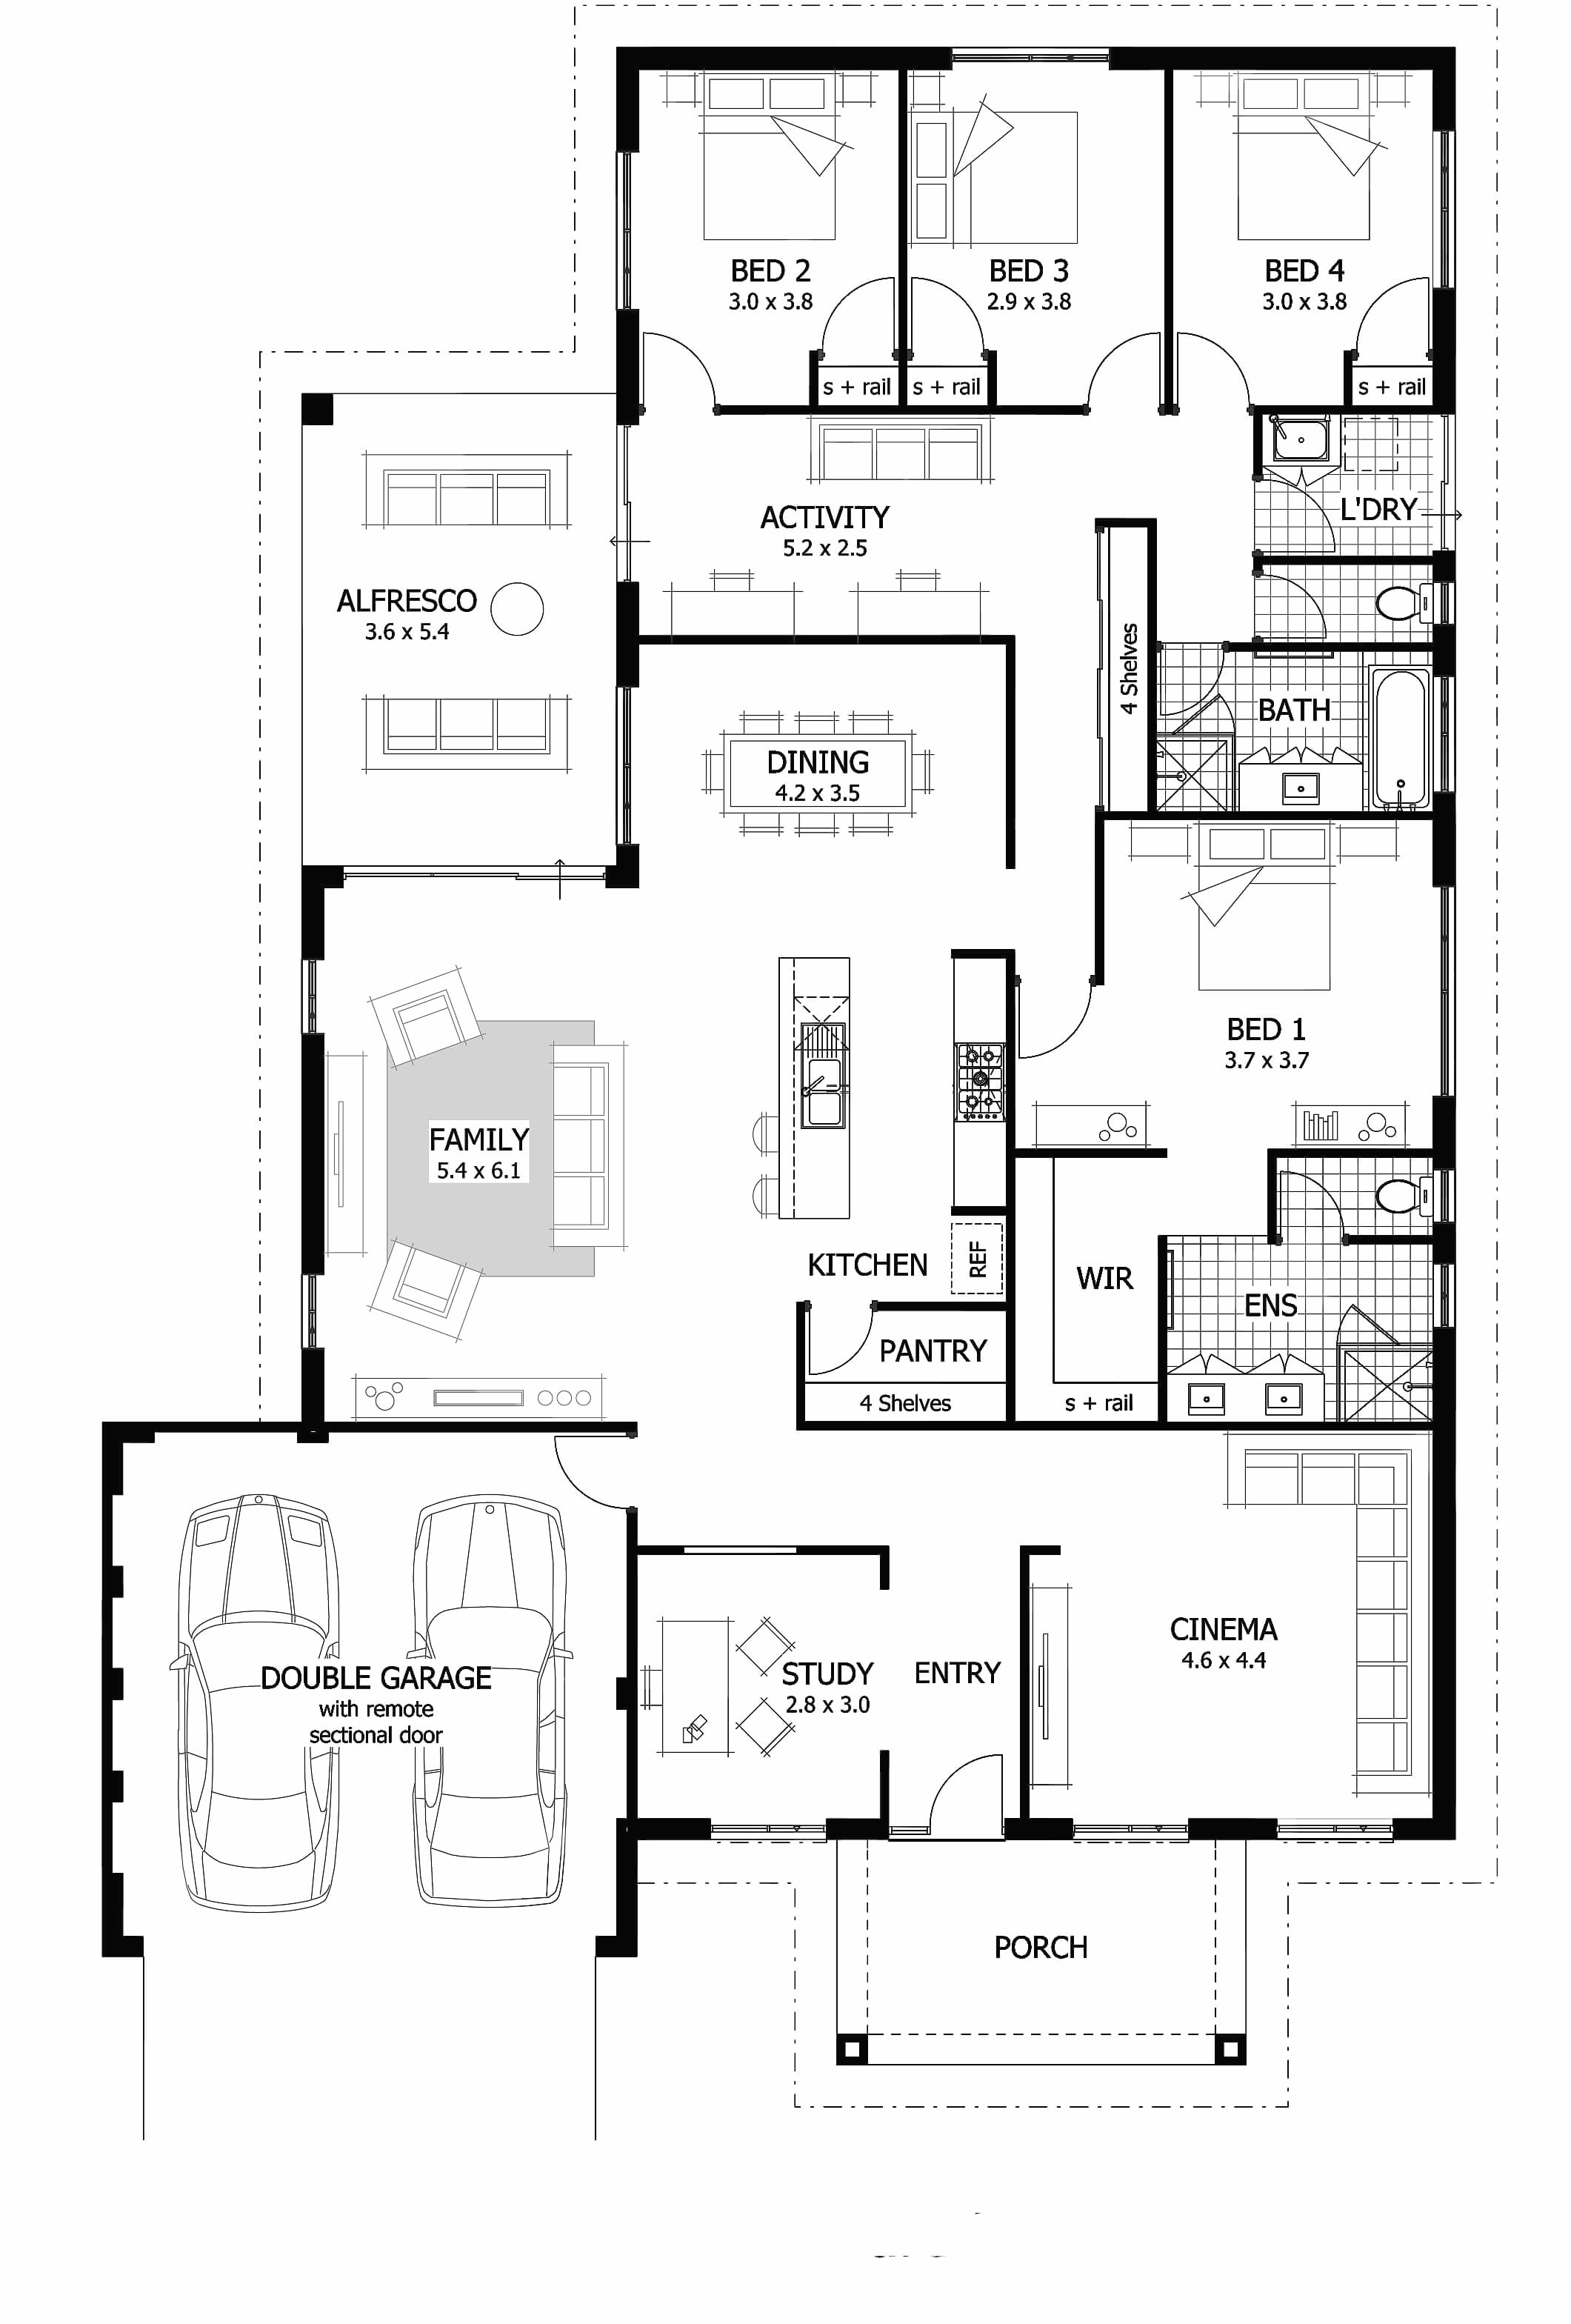 Luxury Home Plans 2018 Luxury Homes Plans the Best Cliff May Floor Plans Luxury